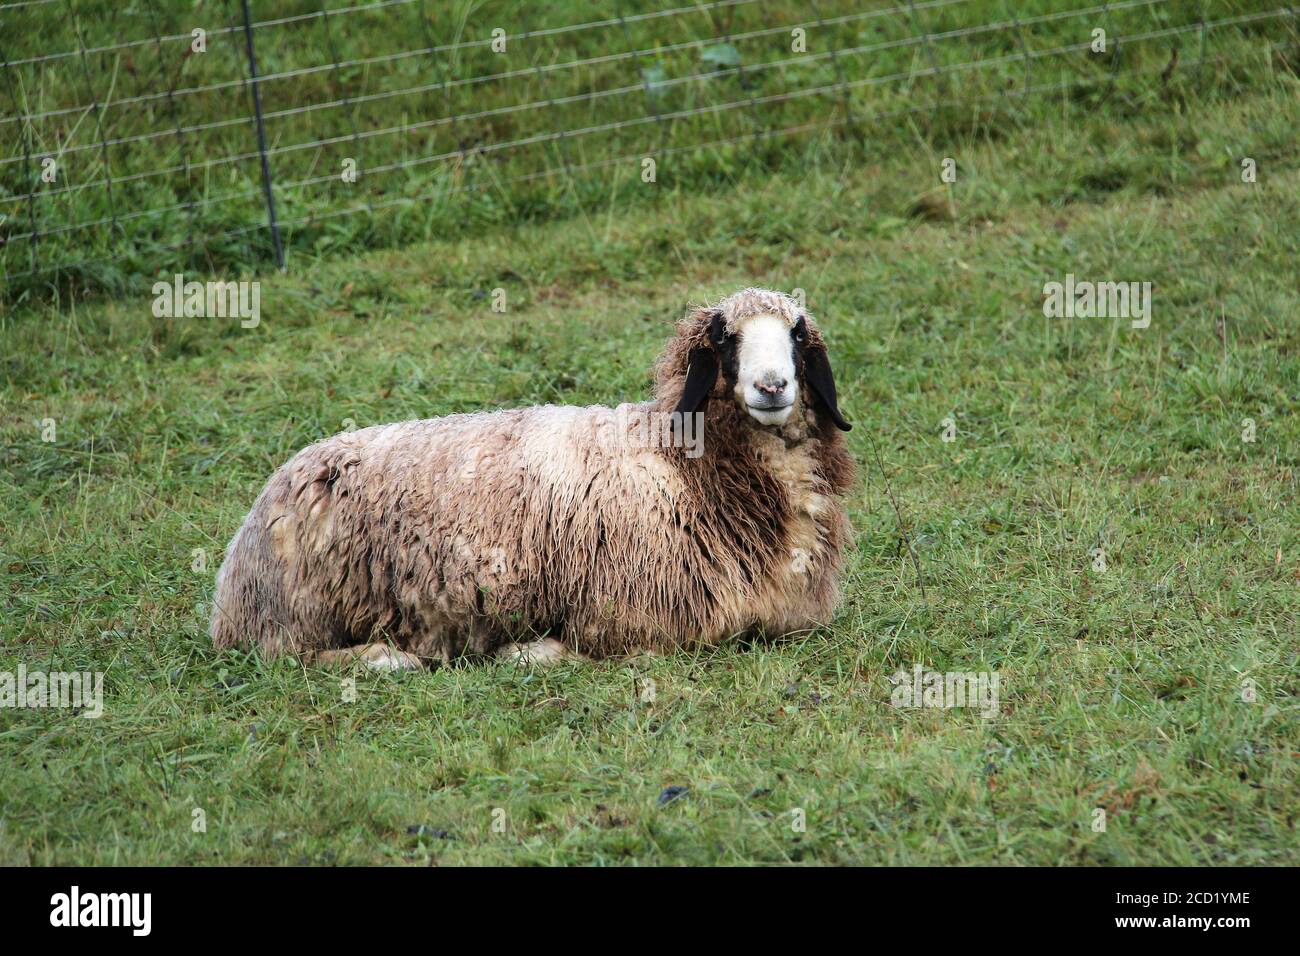 View of a sheep in the field Stock Photo